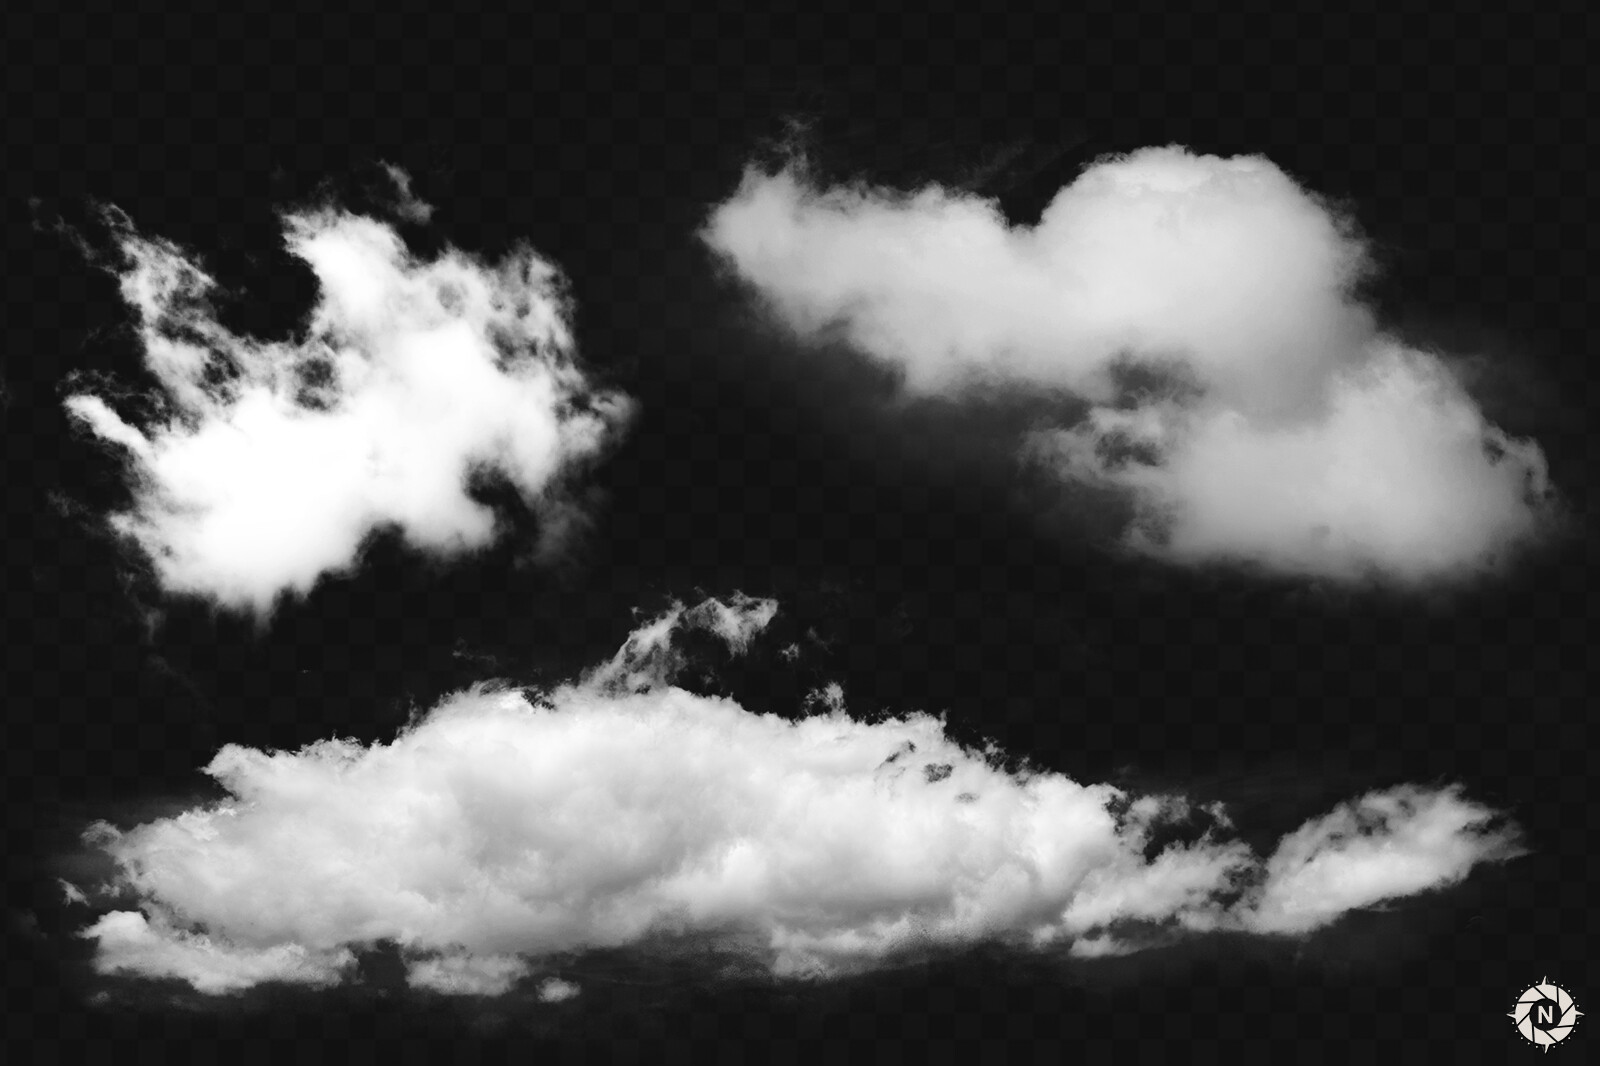 From the PNG Photo Pack: Clouds and Mist 1 and 2

https://www.artstation.com/a/165800